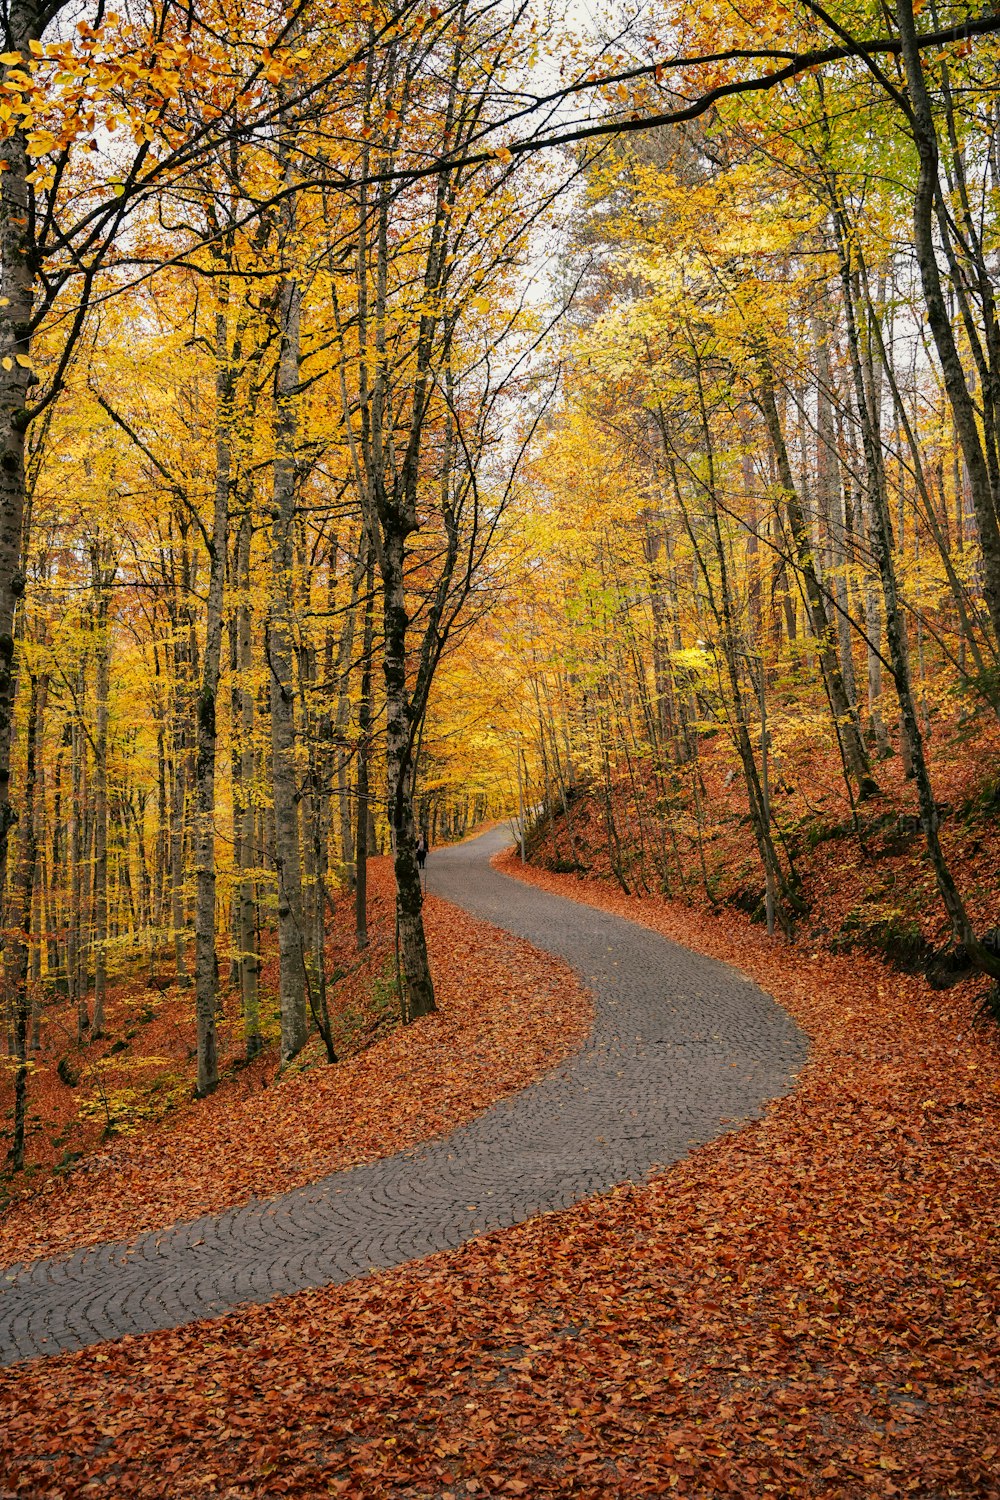 a road with yellow leaves on the sides